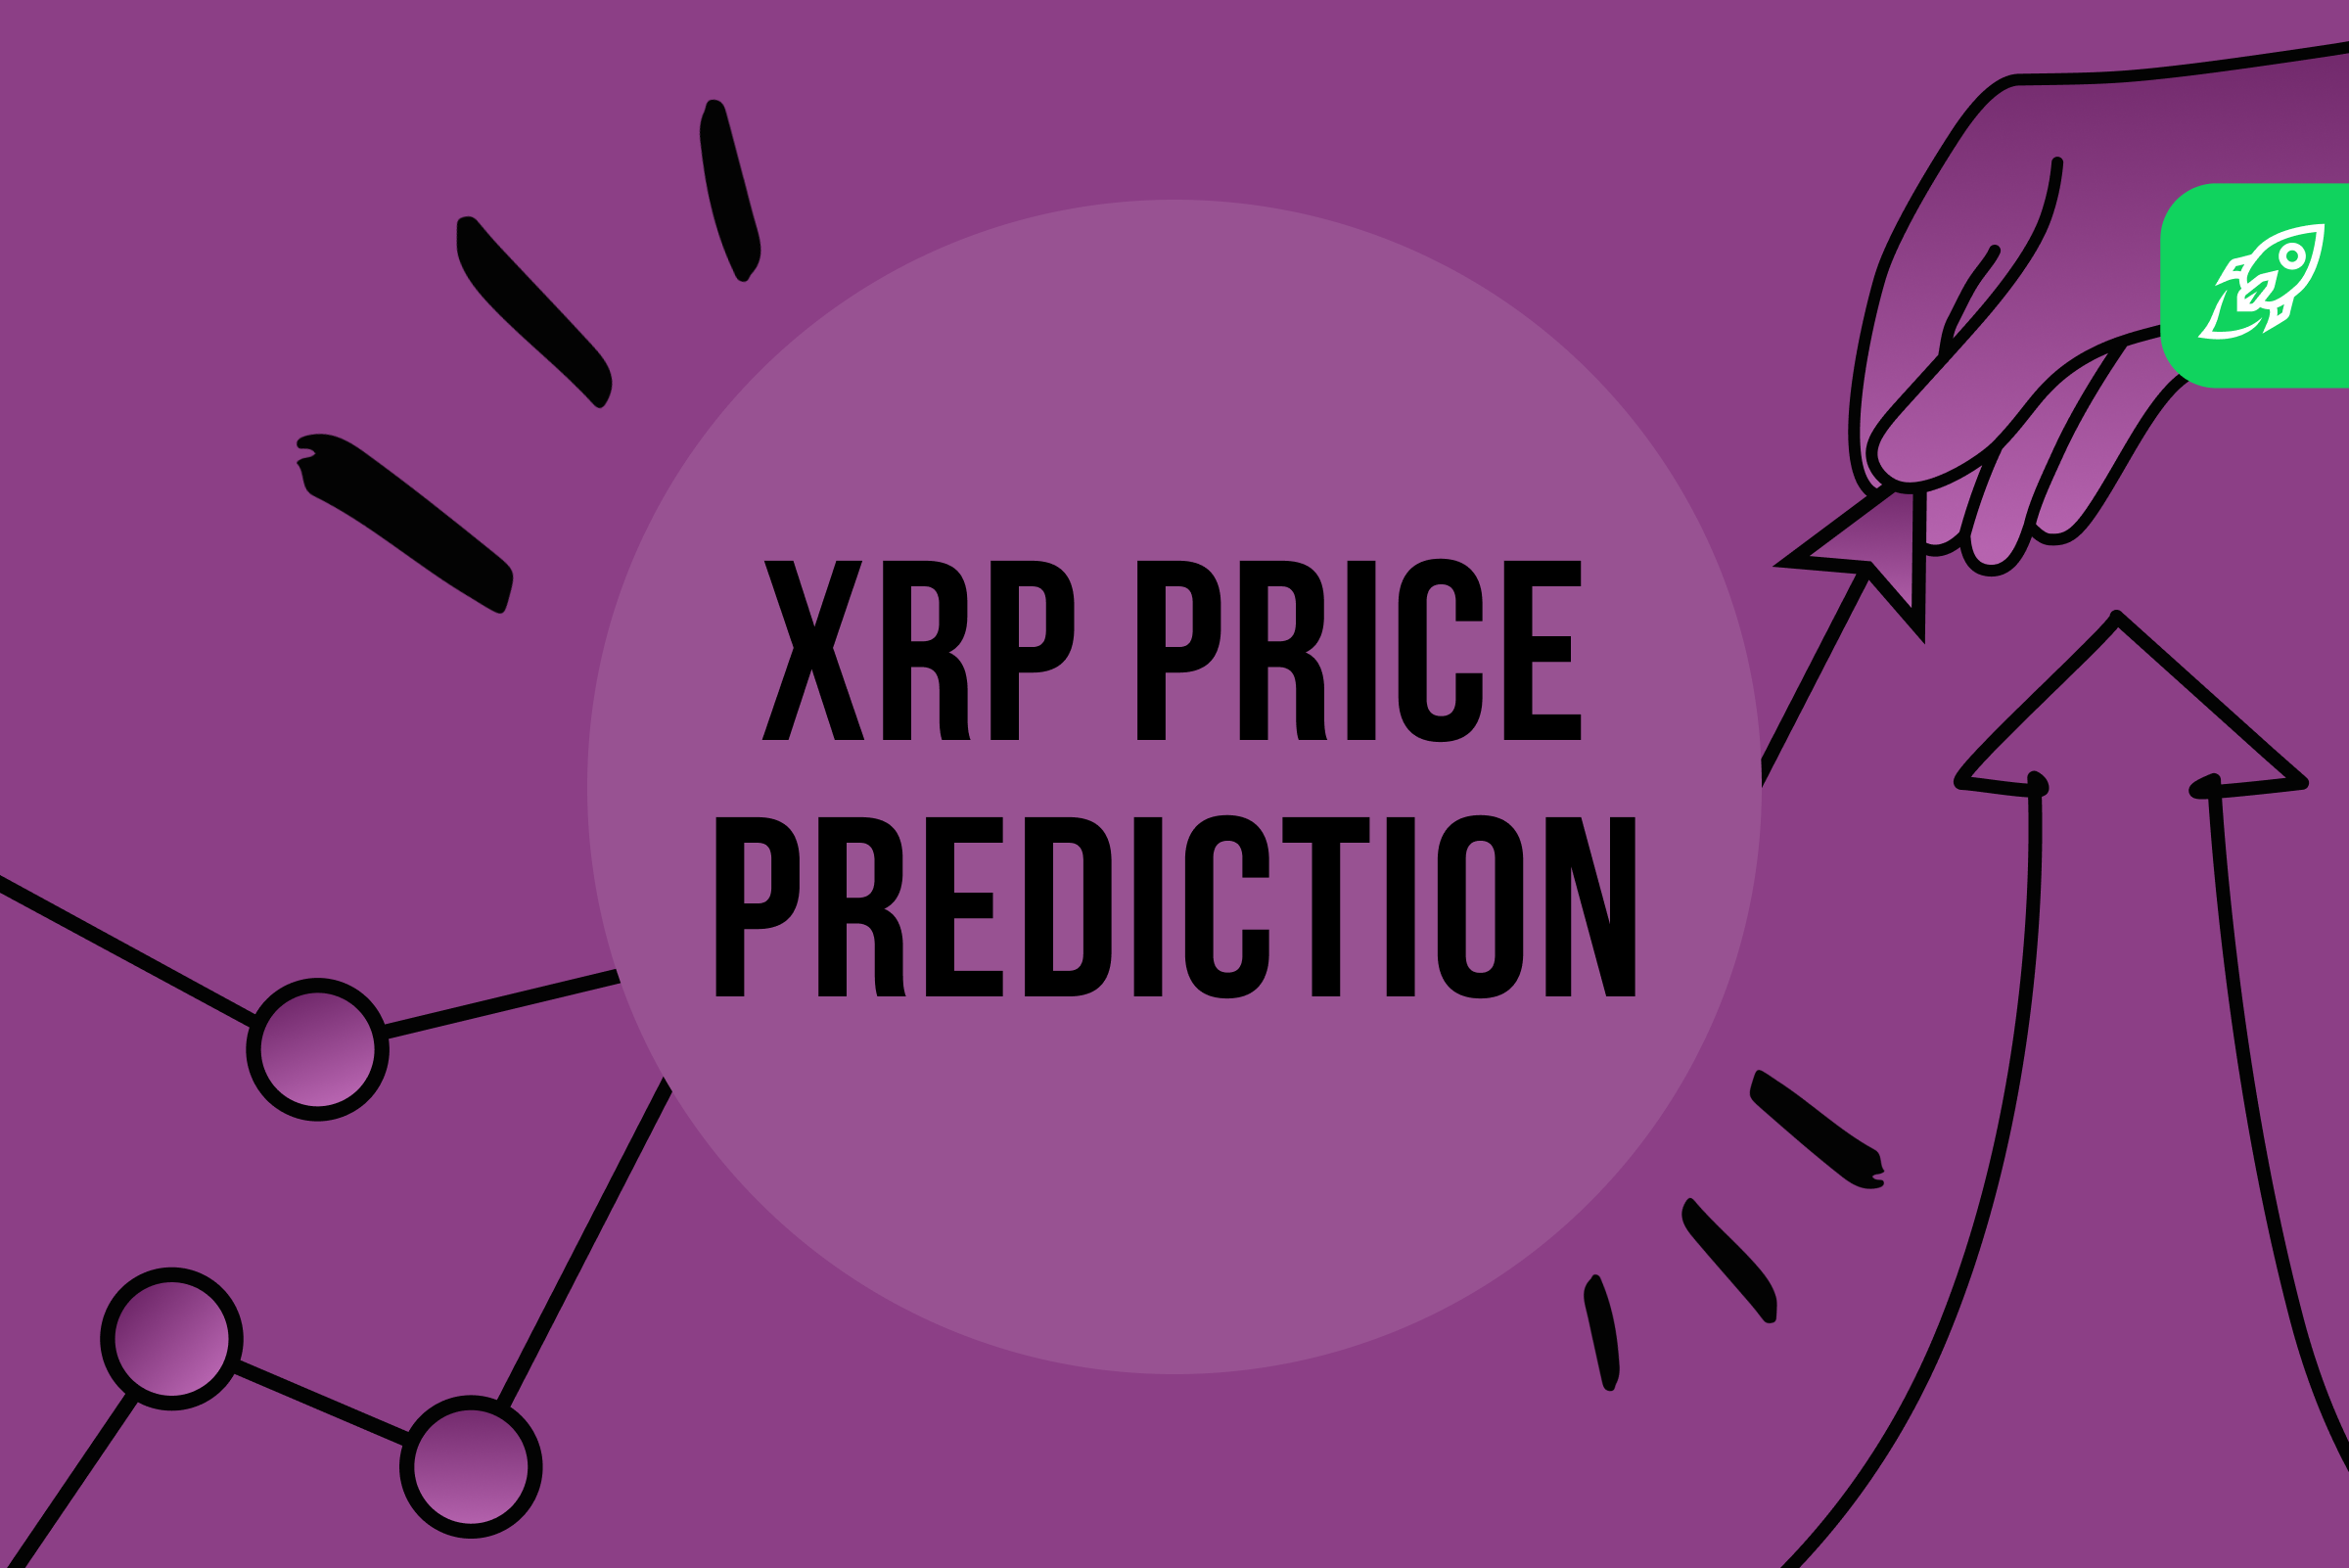 XRP Price Prediction - Will Ripple Reach $1 After SEC Lawsuit?